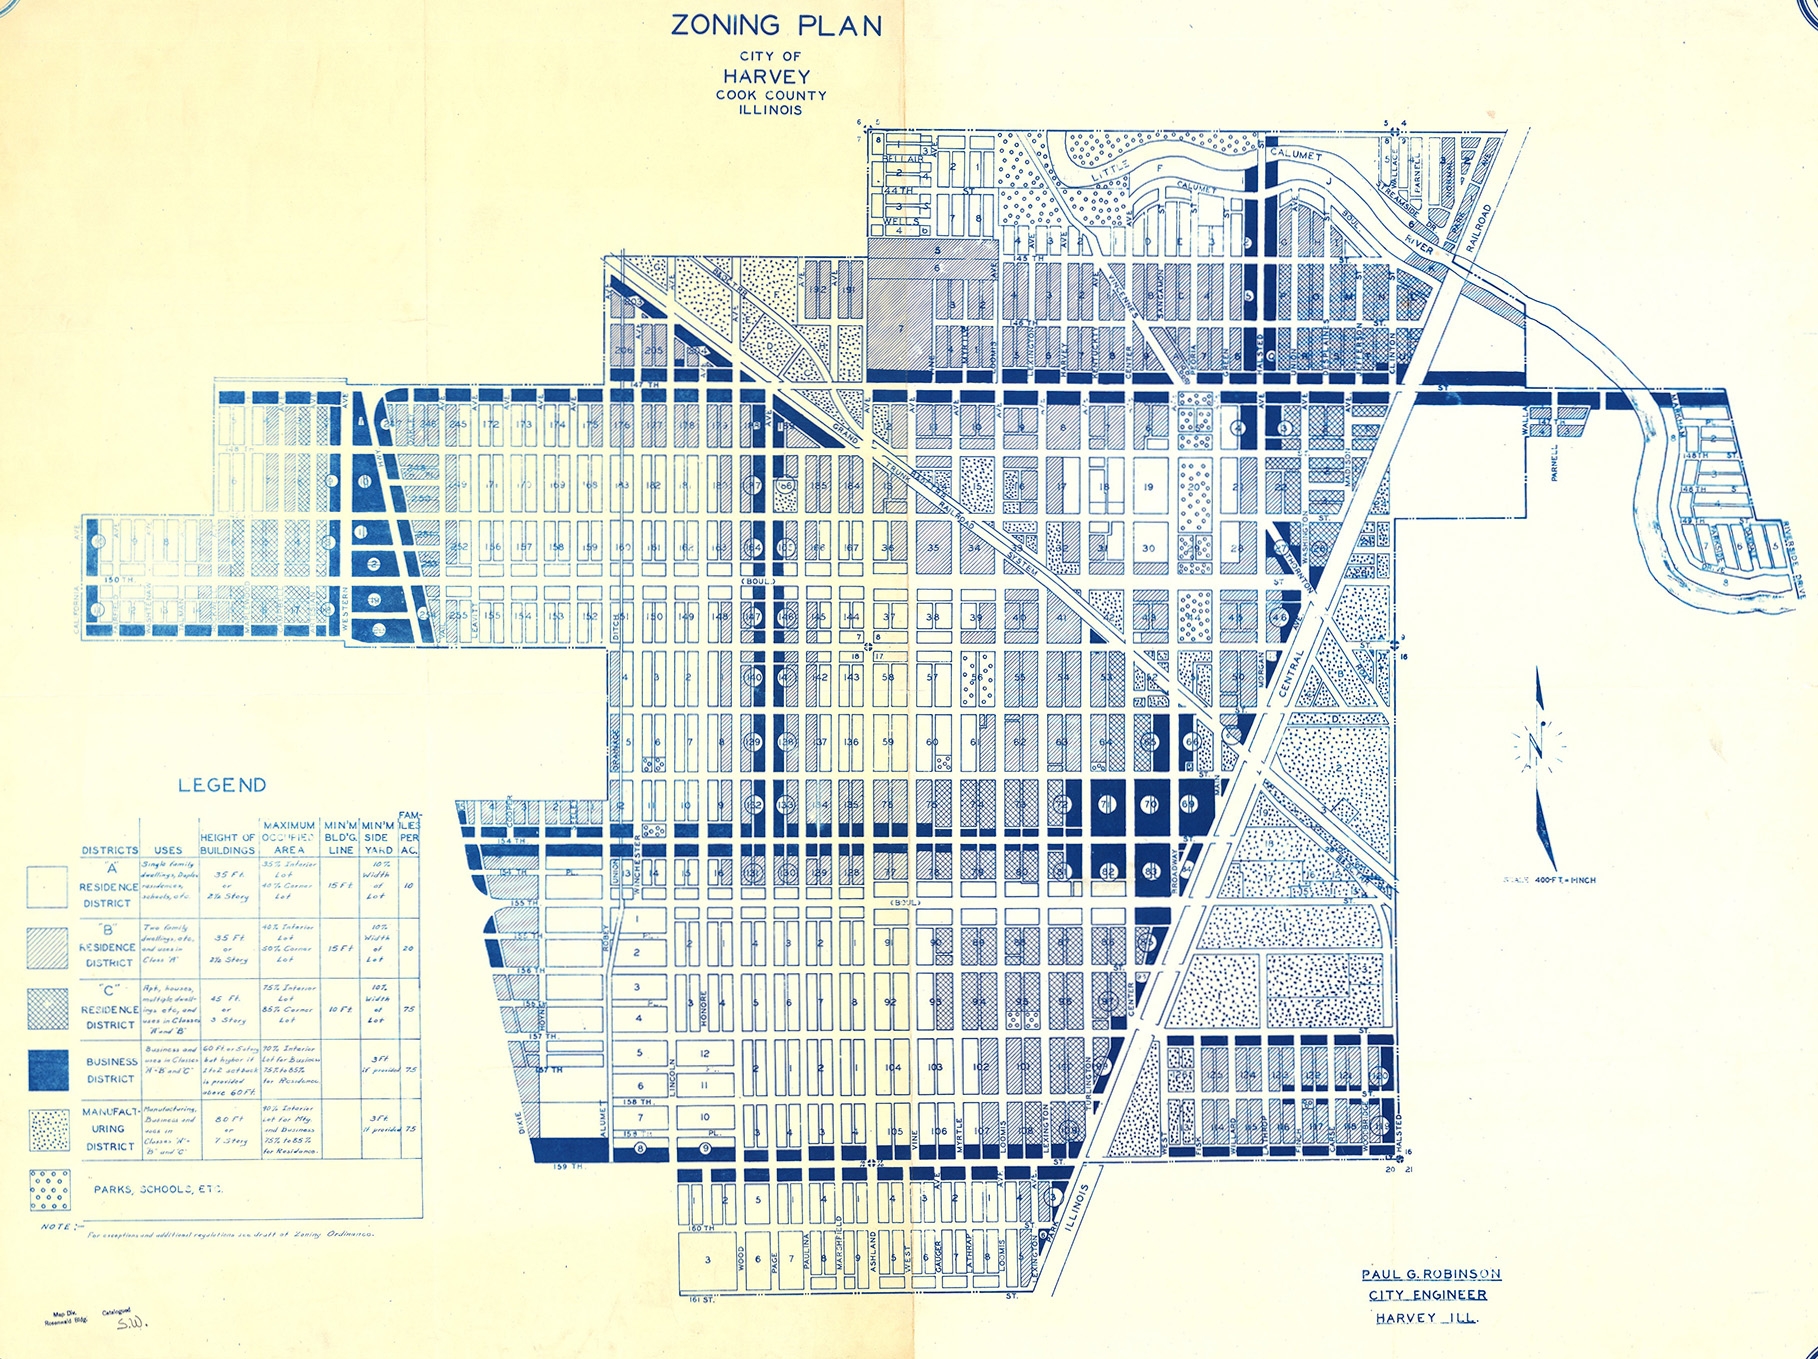 An example of zoning, this map from Harvey, IL includes three types of residential districts (A-C), a business district, a manufacturing district, as well as land set aside for public use.